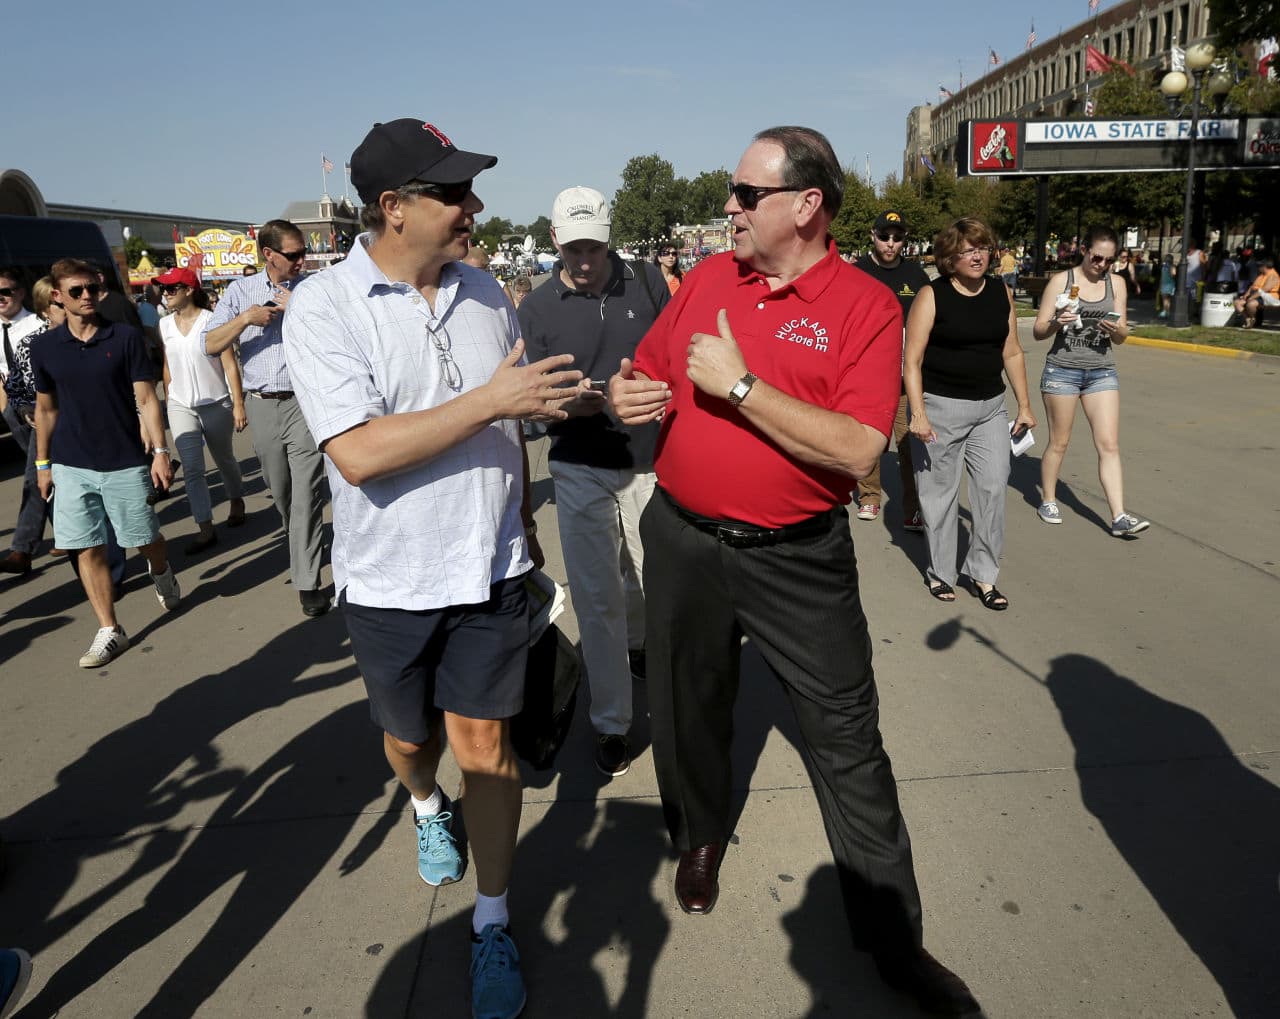 Republican presidential candidate Mike Huckabee talks with a fairgoer at the Iowa State Fair Thursday. (Charlie Riedel/AP)